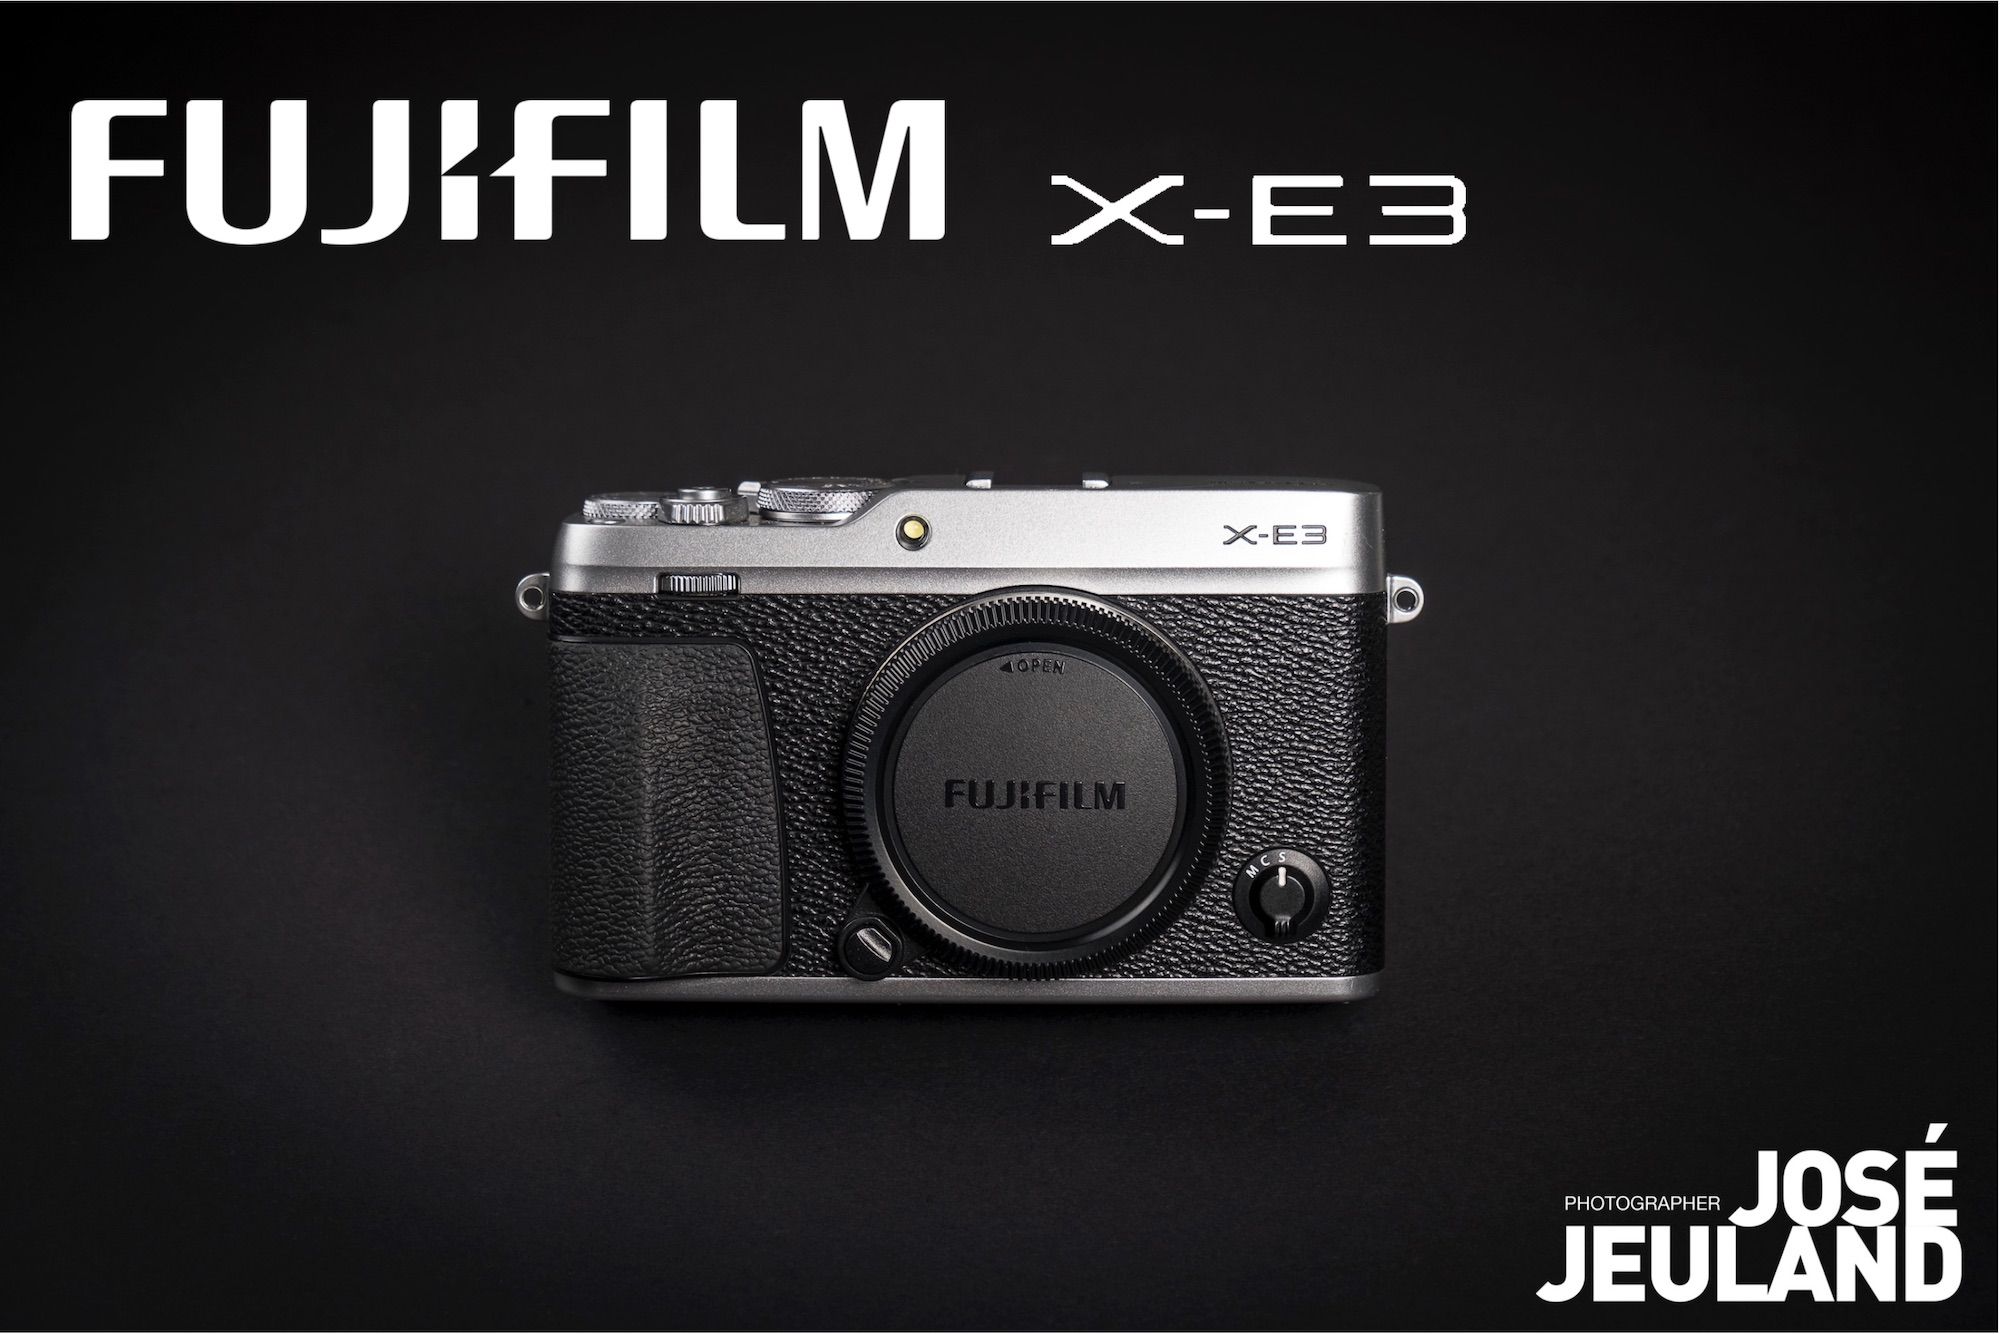 My review for the Fujifilm X-E3